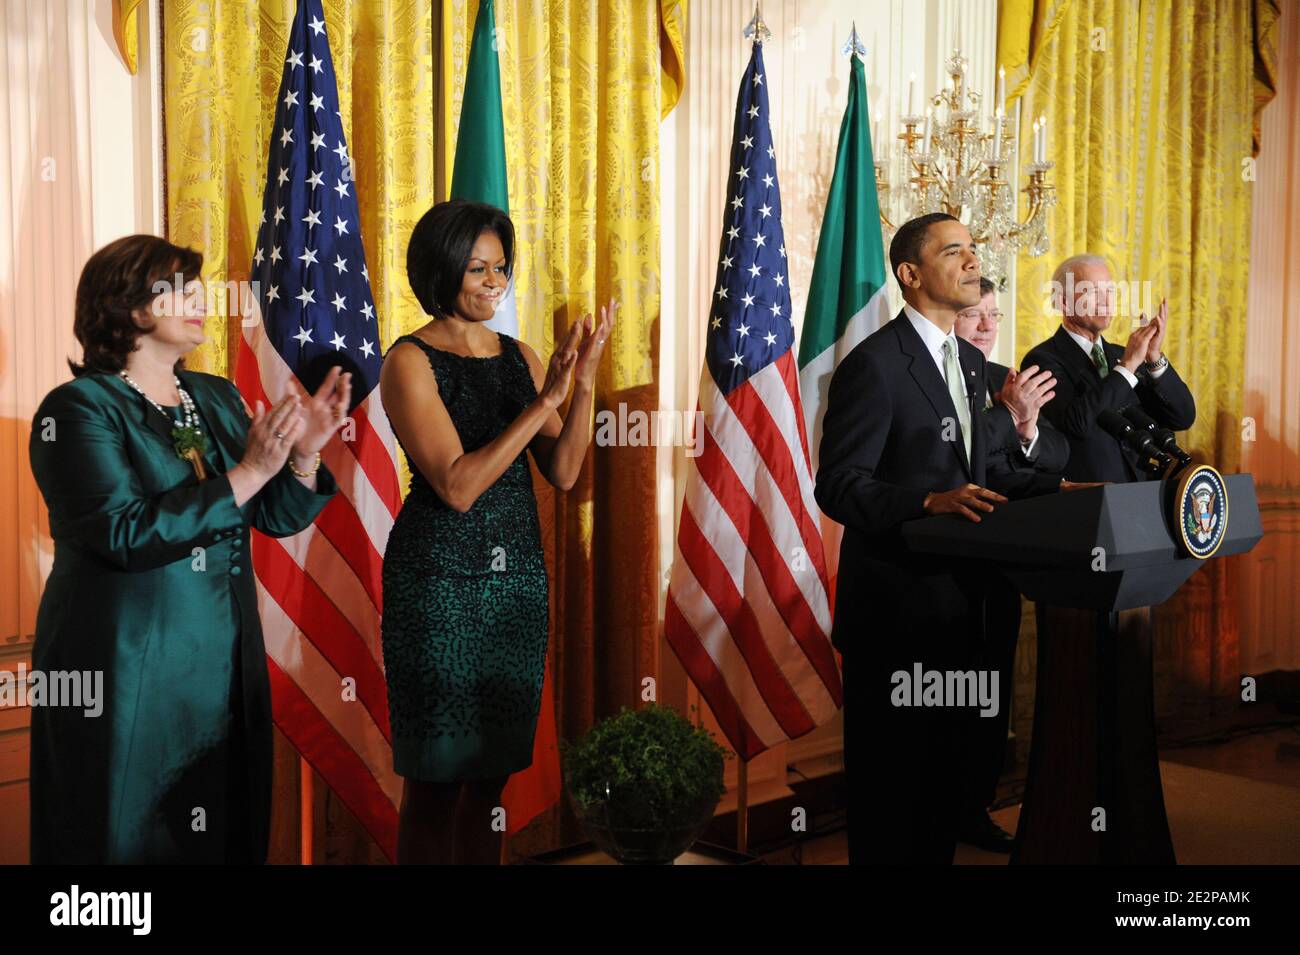 US President Barack Obama (C) delivers remarks as US Vice President Joe Biden (R), Prime Minister (Taoiseach) of Ireland Brian Cowen (2-R), US First Lady Michelle Obama (2-L) and wife of the Taoiseach Mary Cowen (L) look on during the annual St. Patrick's Day Reception in the East Room of the White House, in Washington DC, USA, on March 17, 2010. President Obama and the Prime Minister (Taoiseach) of Ireland Brian Cowen delivered remarks and participated in a traditional Shamrock ceremony. Photo by Michael Reynolds/Pool/ABACAPRESS.COM Stock Photo